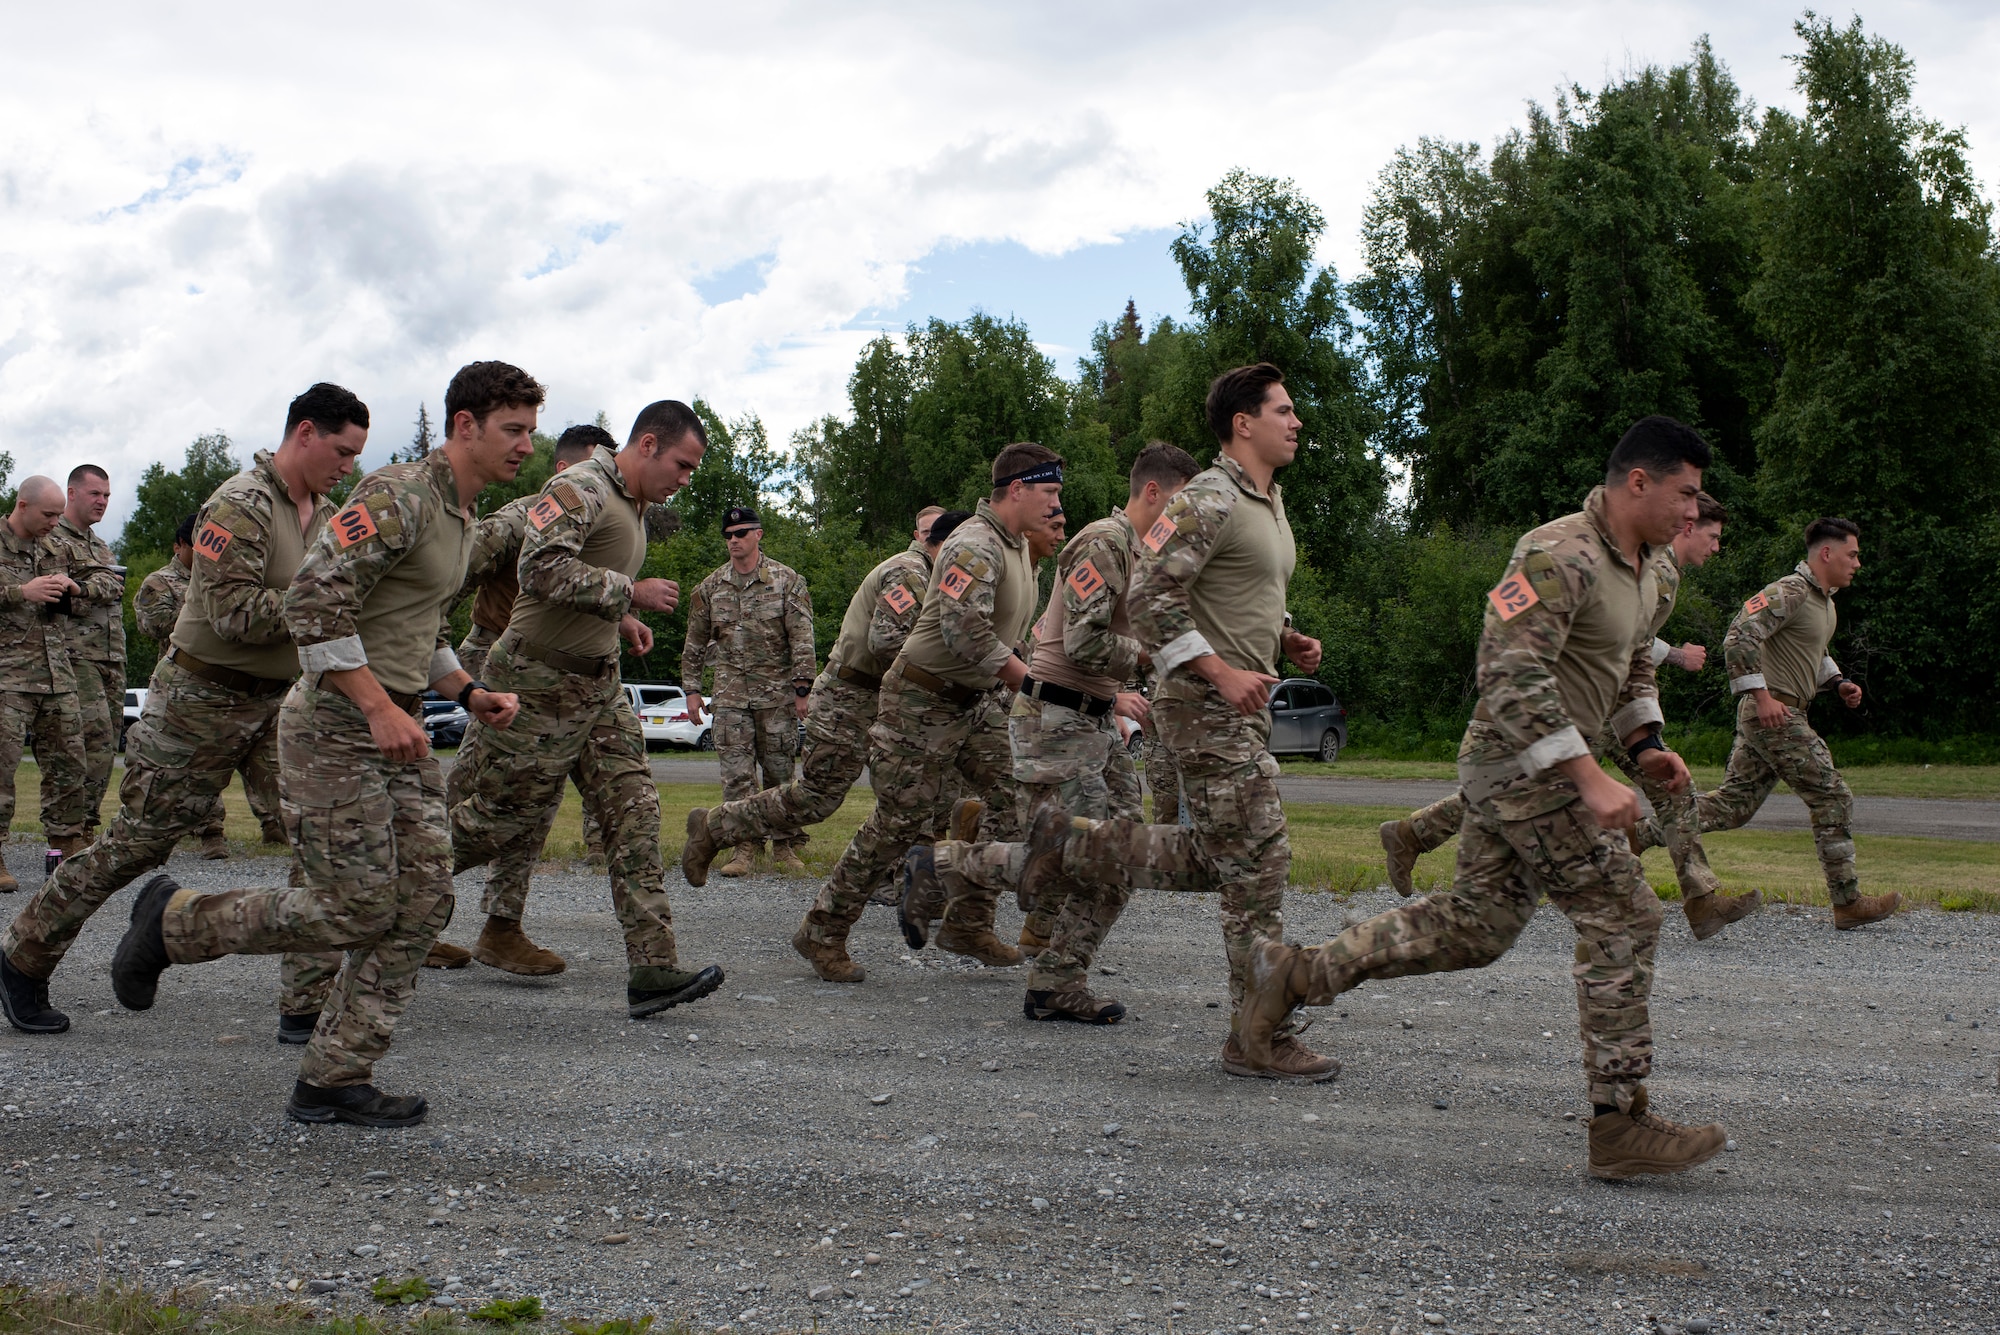 U.S. Air Force tactical air control party specialists from the 1st Air Support Operations Group begin the timed run portion of a physical training event during the Chaos Challenge 2021 at Joint Base Elmendorf-Richardson, Alaska, July 13, 2021. The Chaos Challenge 2021 was a multi-day series of mental and physical contests sponsored by the 1st Air Support Operations Group with participants from the 3rd, 5th, 25th, and 604th Air Support Operations Squadrons and a guest team from the 673d Security Forces Squadron. The winner of the competition will go on to compete in Lightning Challenge 2021 to determine the best two-man TACP team in the Air Force.